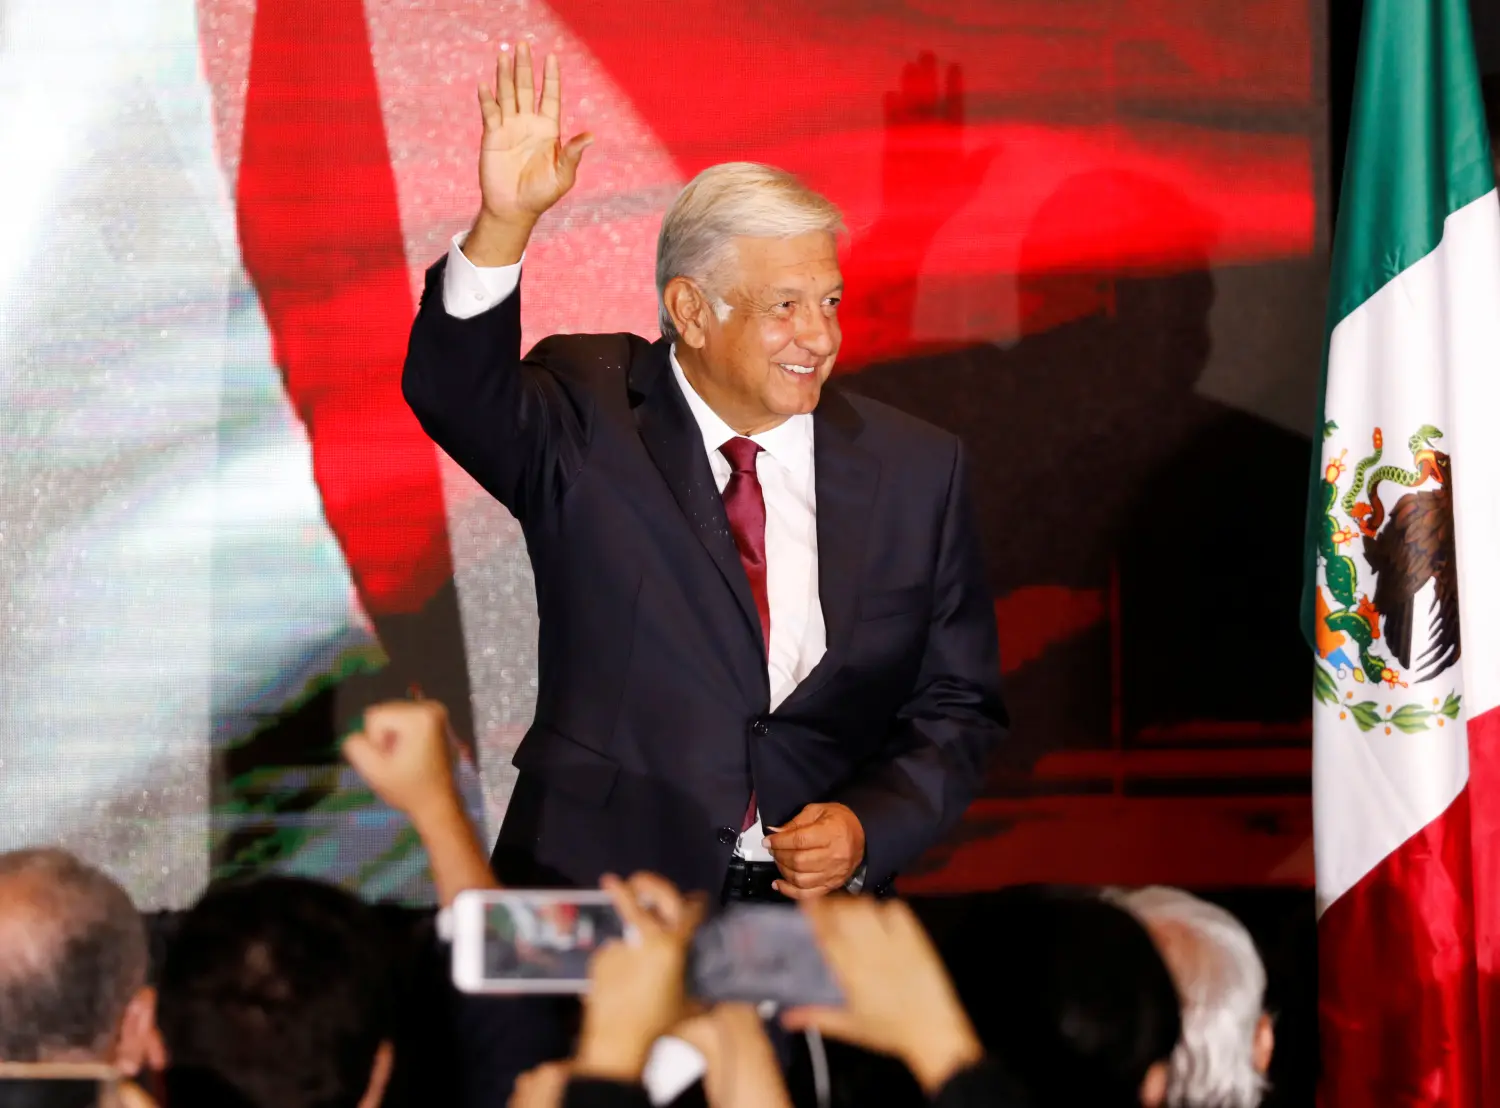 Presidential candidate Andres Manuel Lopez Obrador waves as he addresses supporters after polls closed in the presidential election, in Mexico City, Mexico July 1, 2018.   REUTERS/Carlos Jasso - RC1BC0E9AAC0